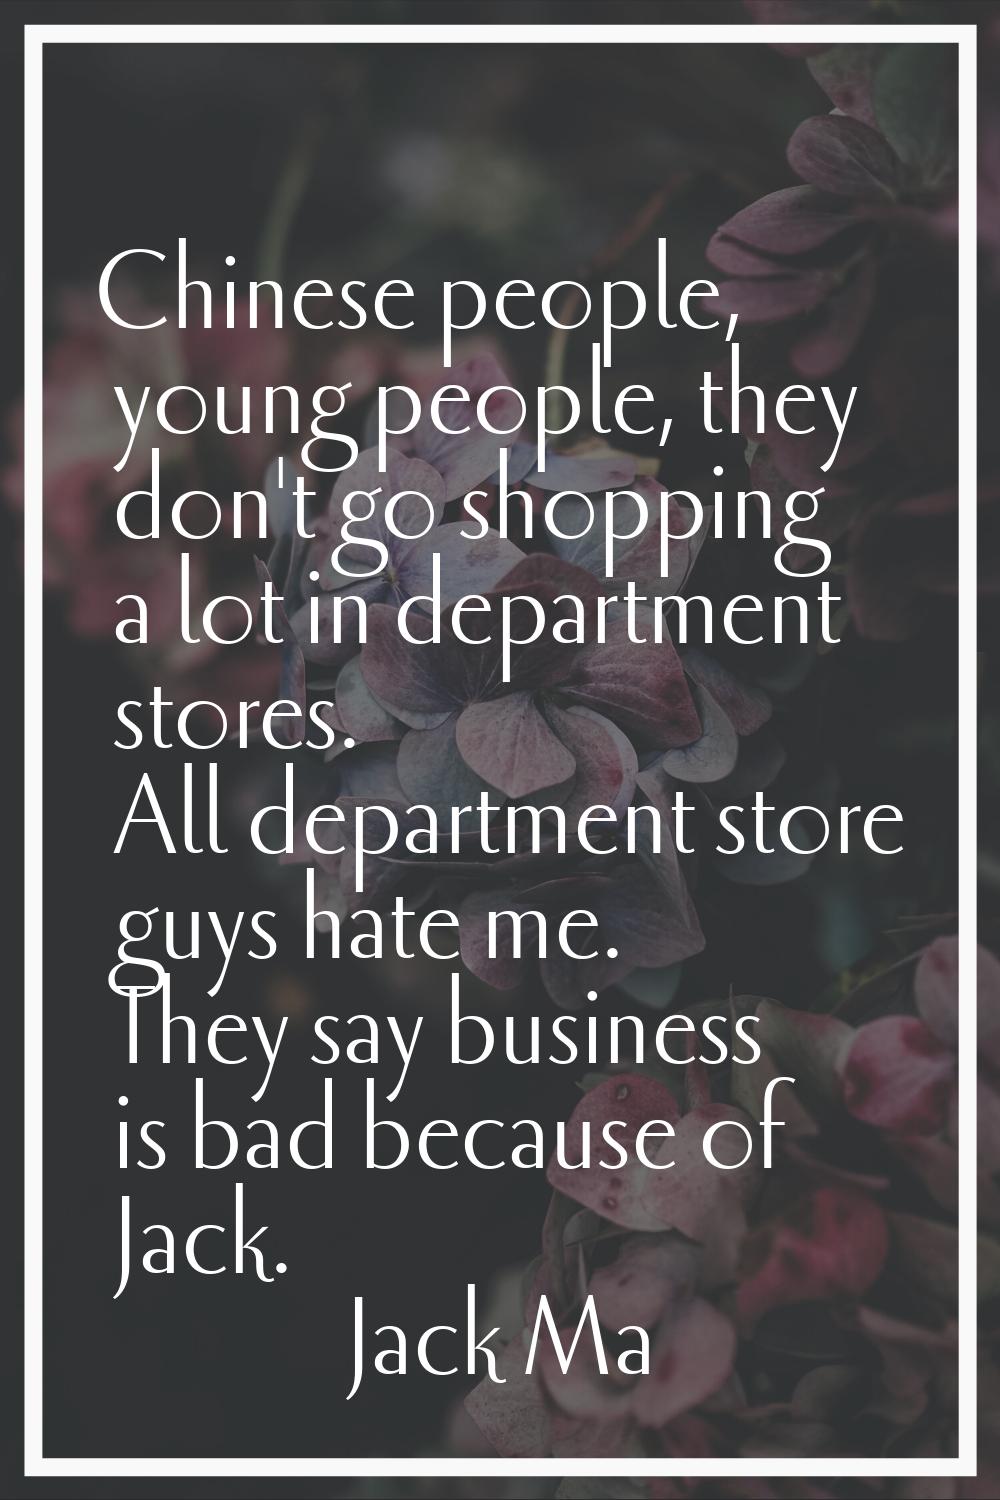 Chinese people, young people, they don't go shopping a lot in department stores. All department sto